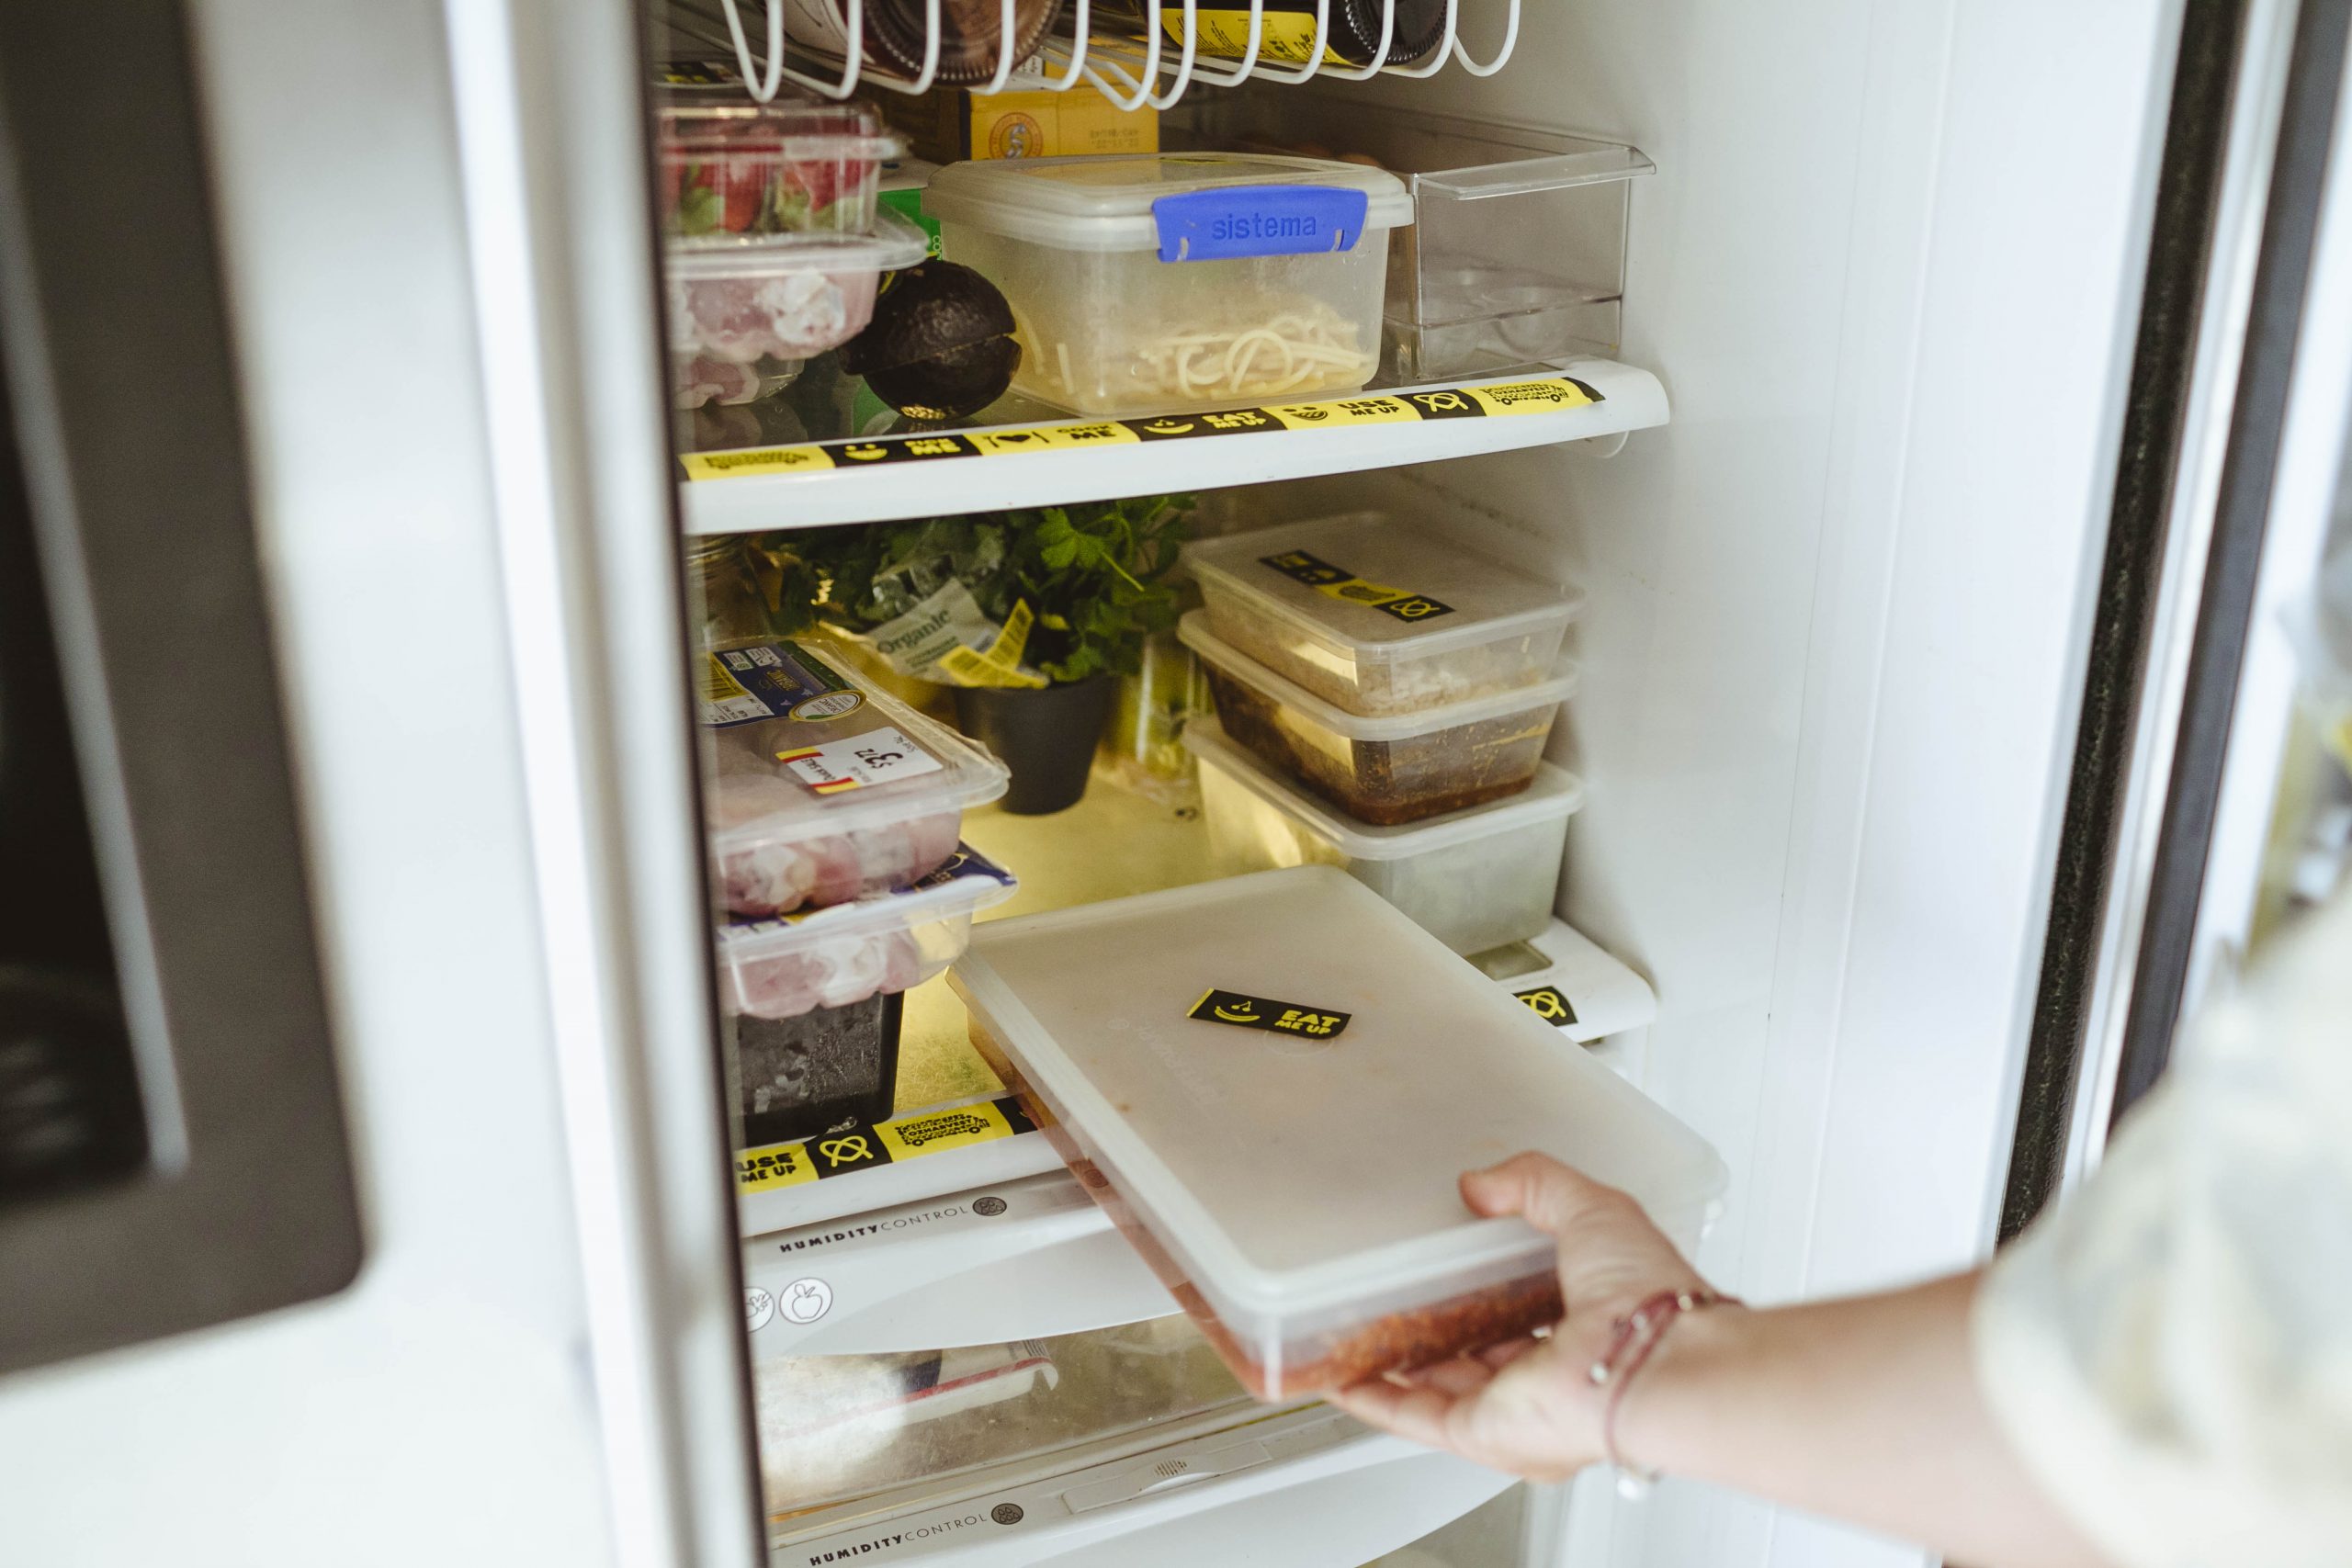 Use-it-up-tape-in-family-fridge-scaled